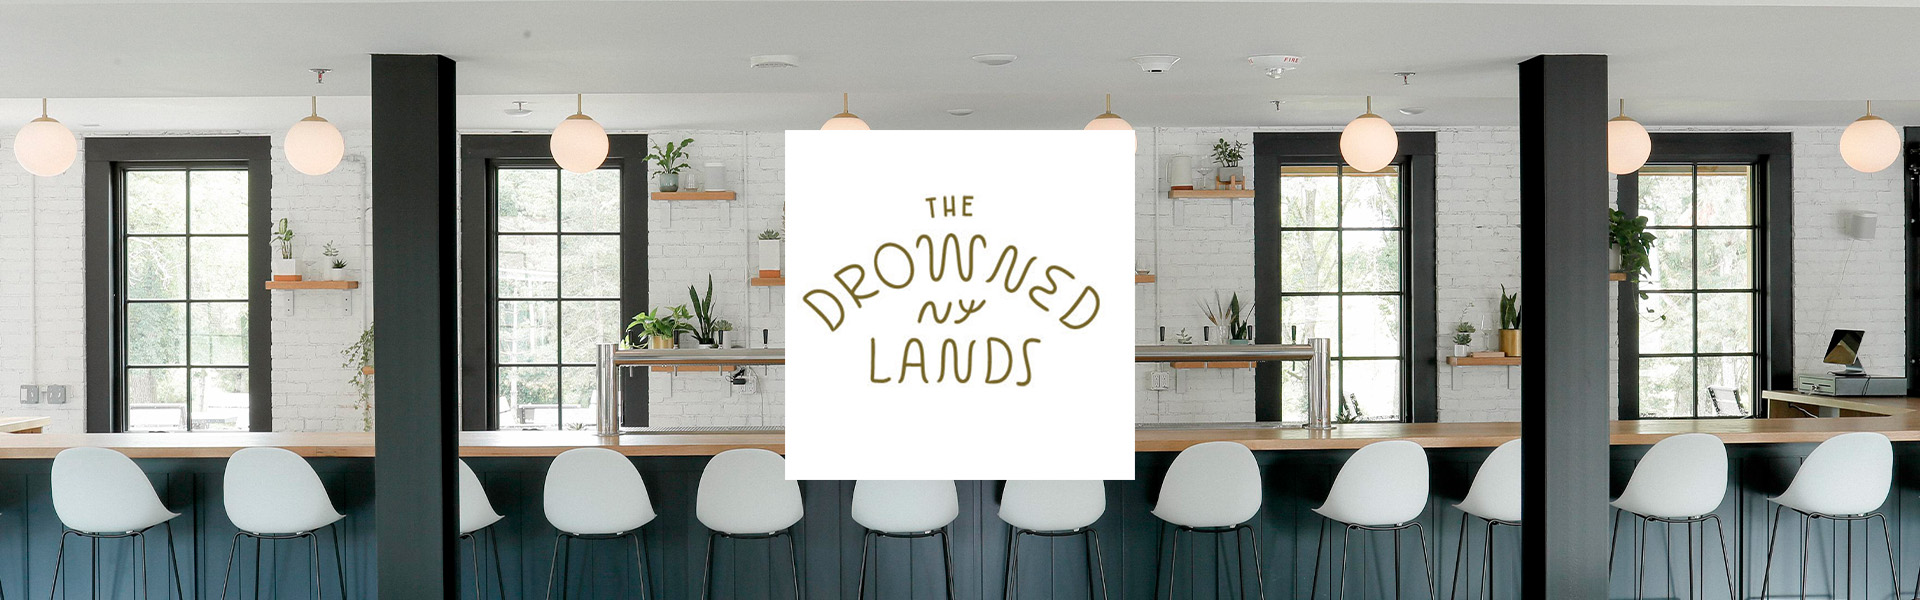 The Drowned Lands Brewery